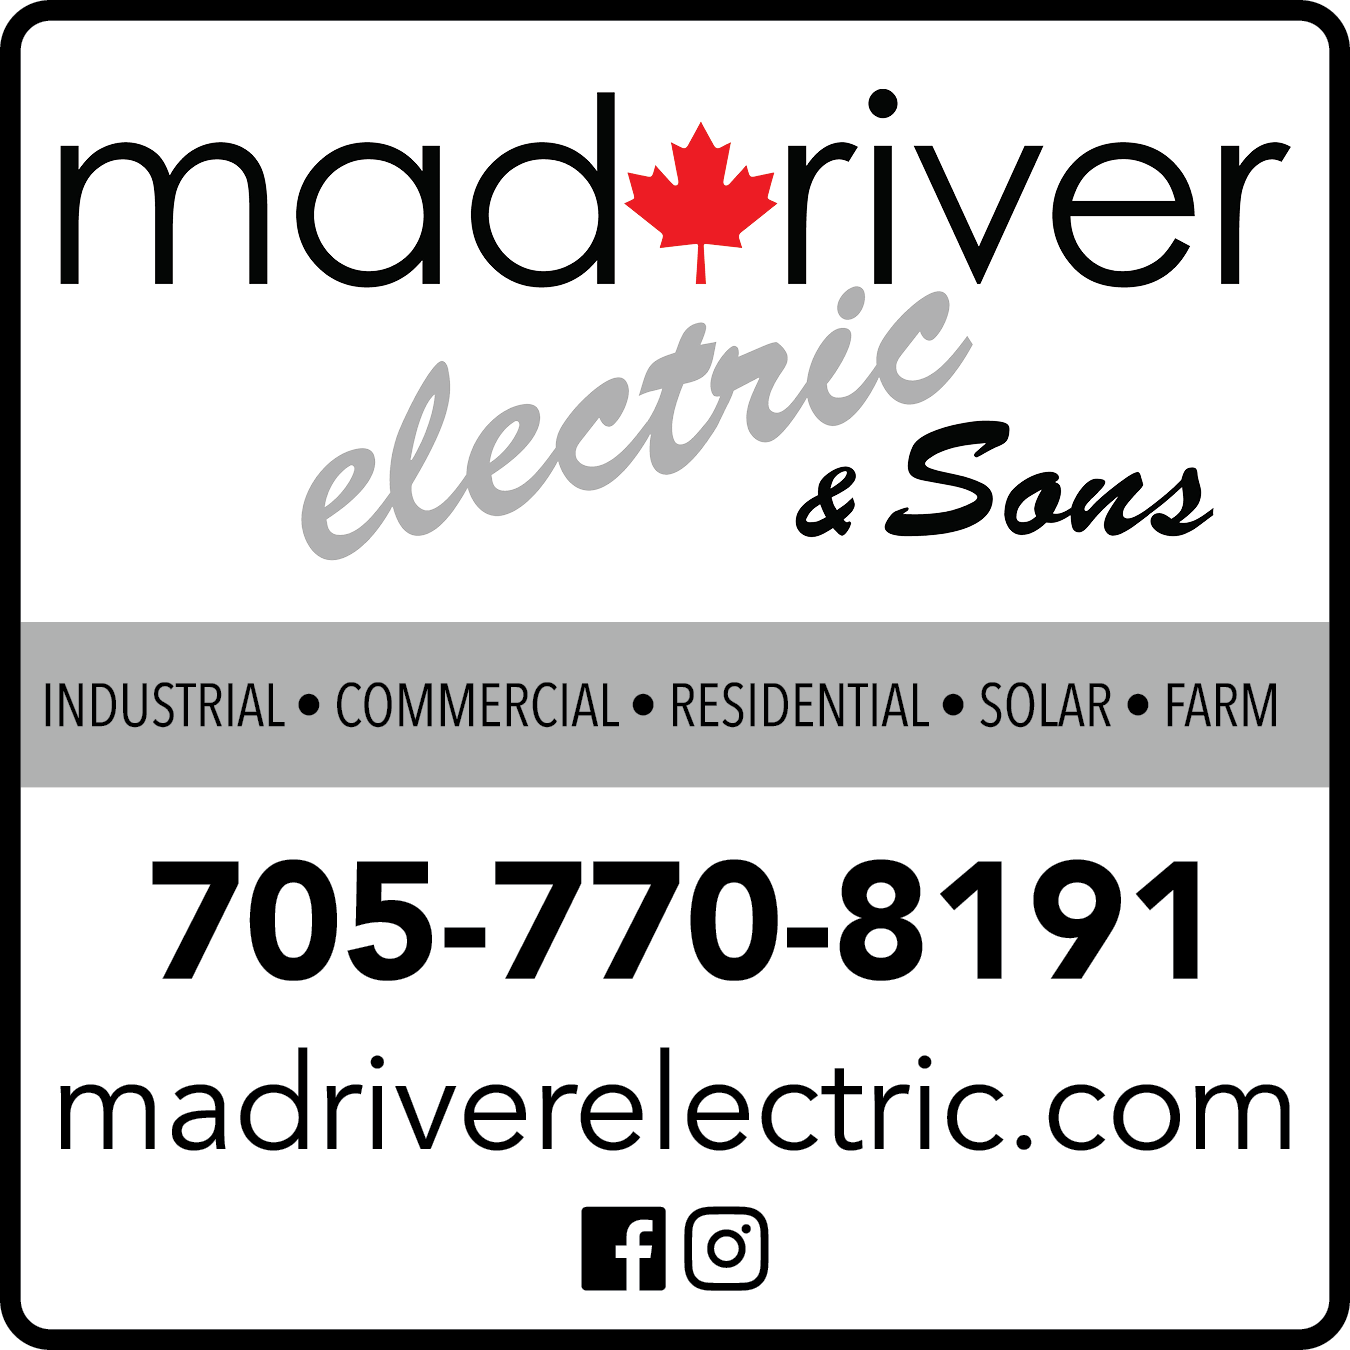 Mad River Electric & Sons